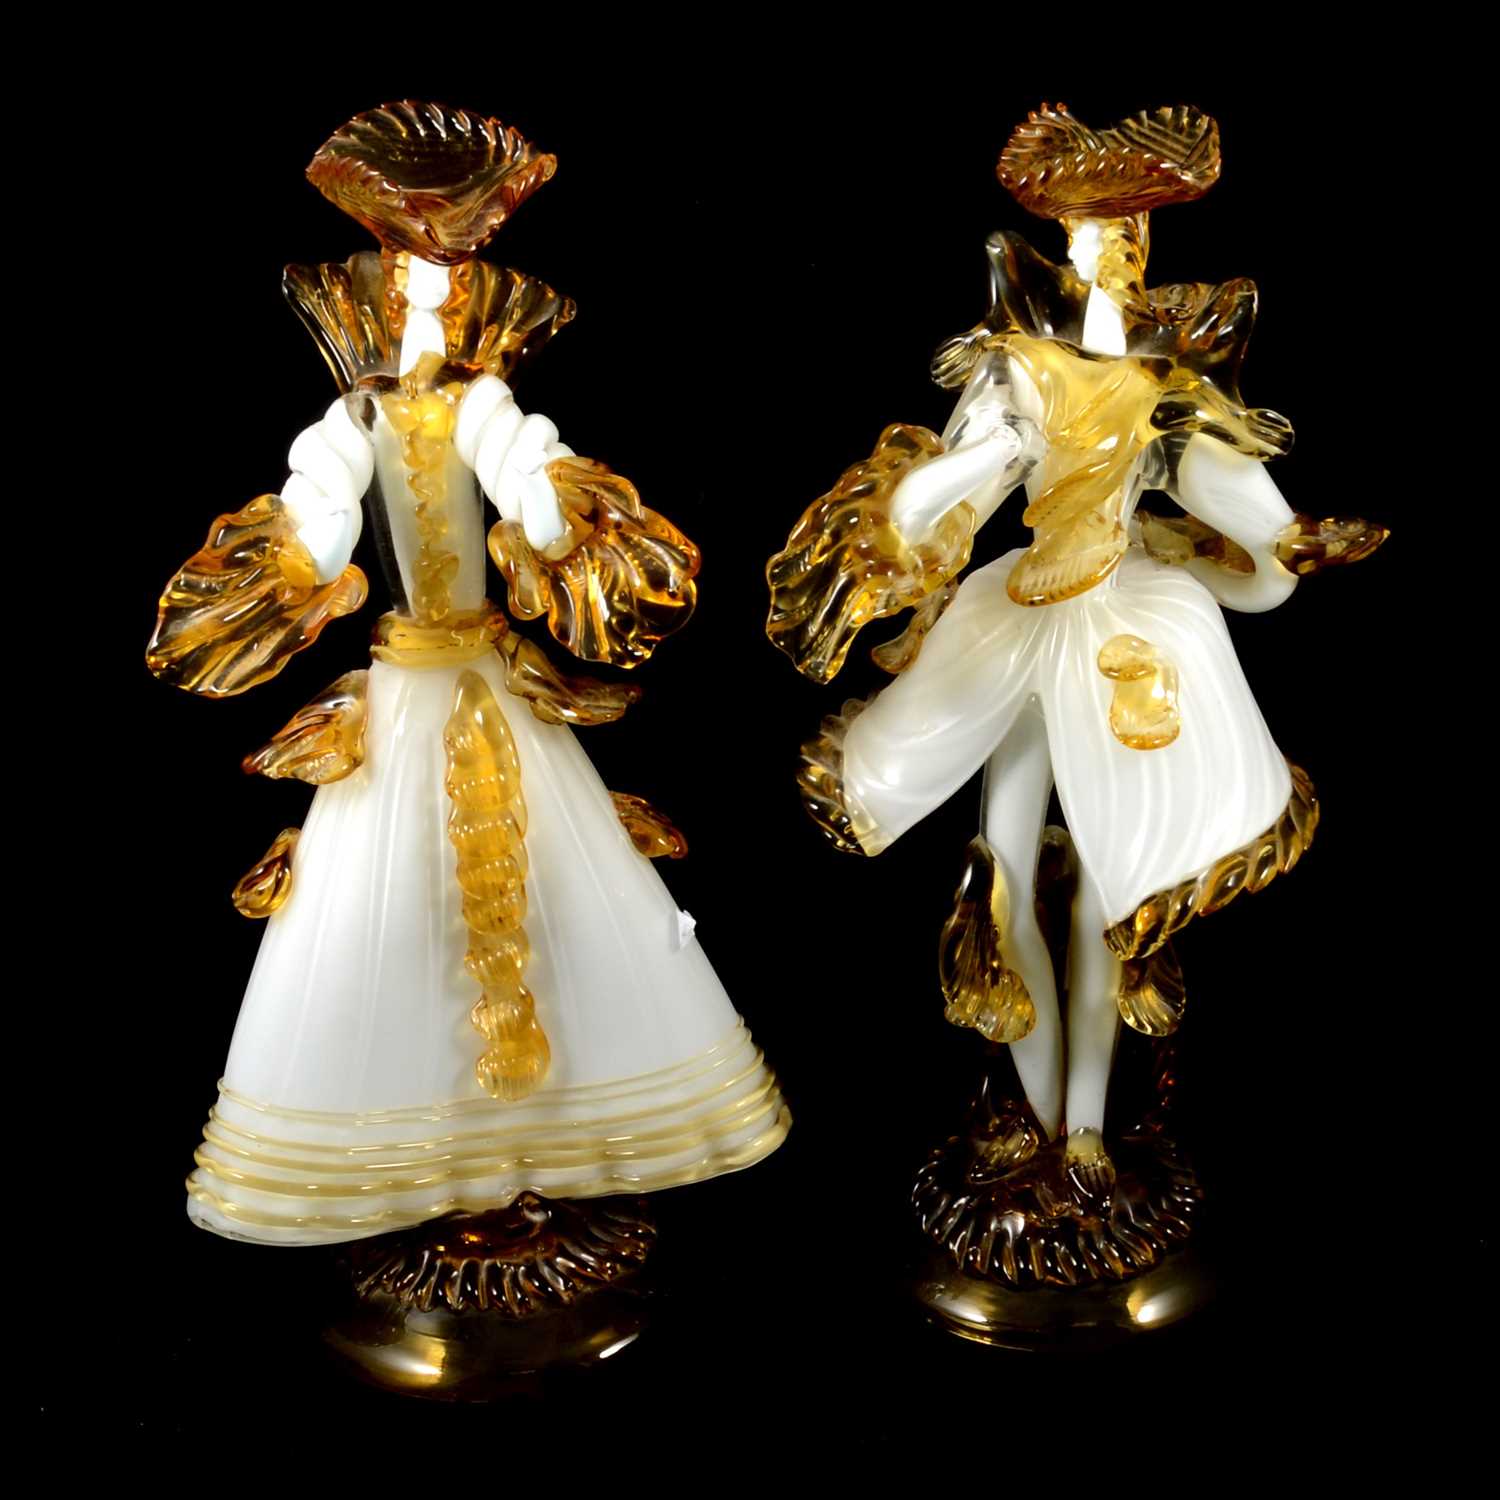 Lot 105 - Two large Two Murano glass figures of Courtesans